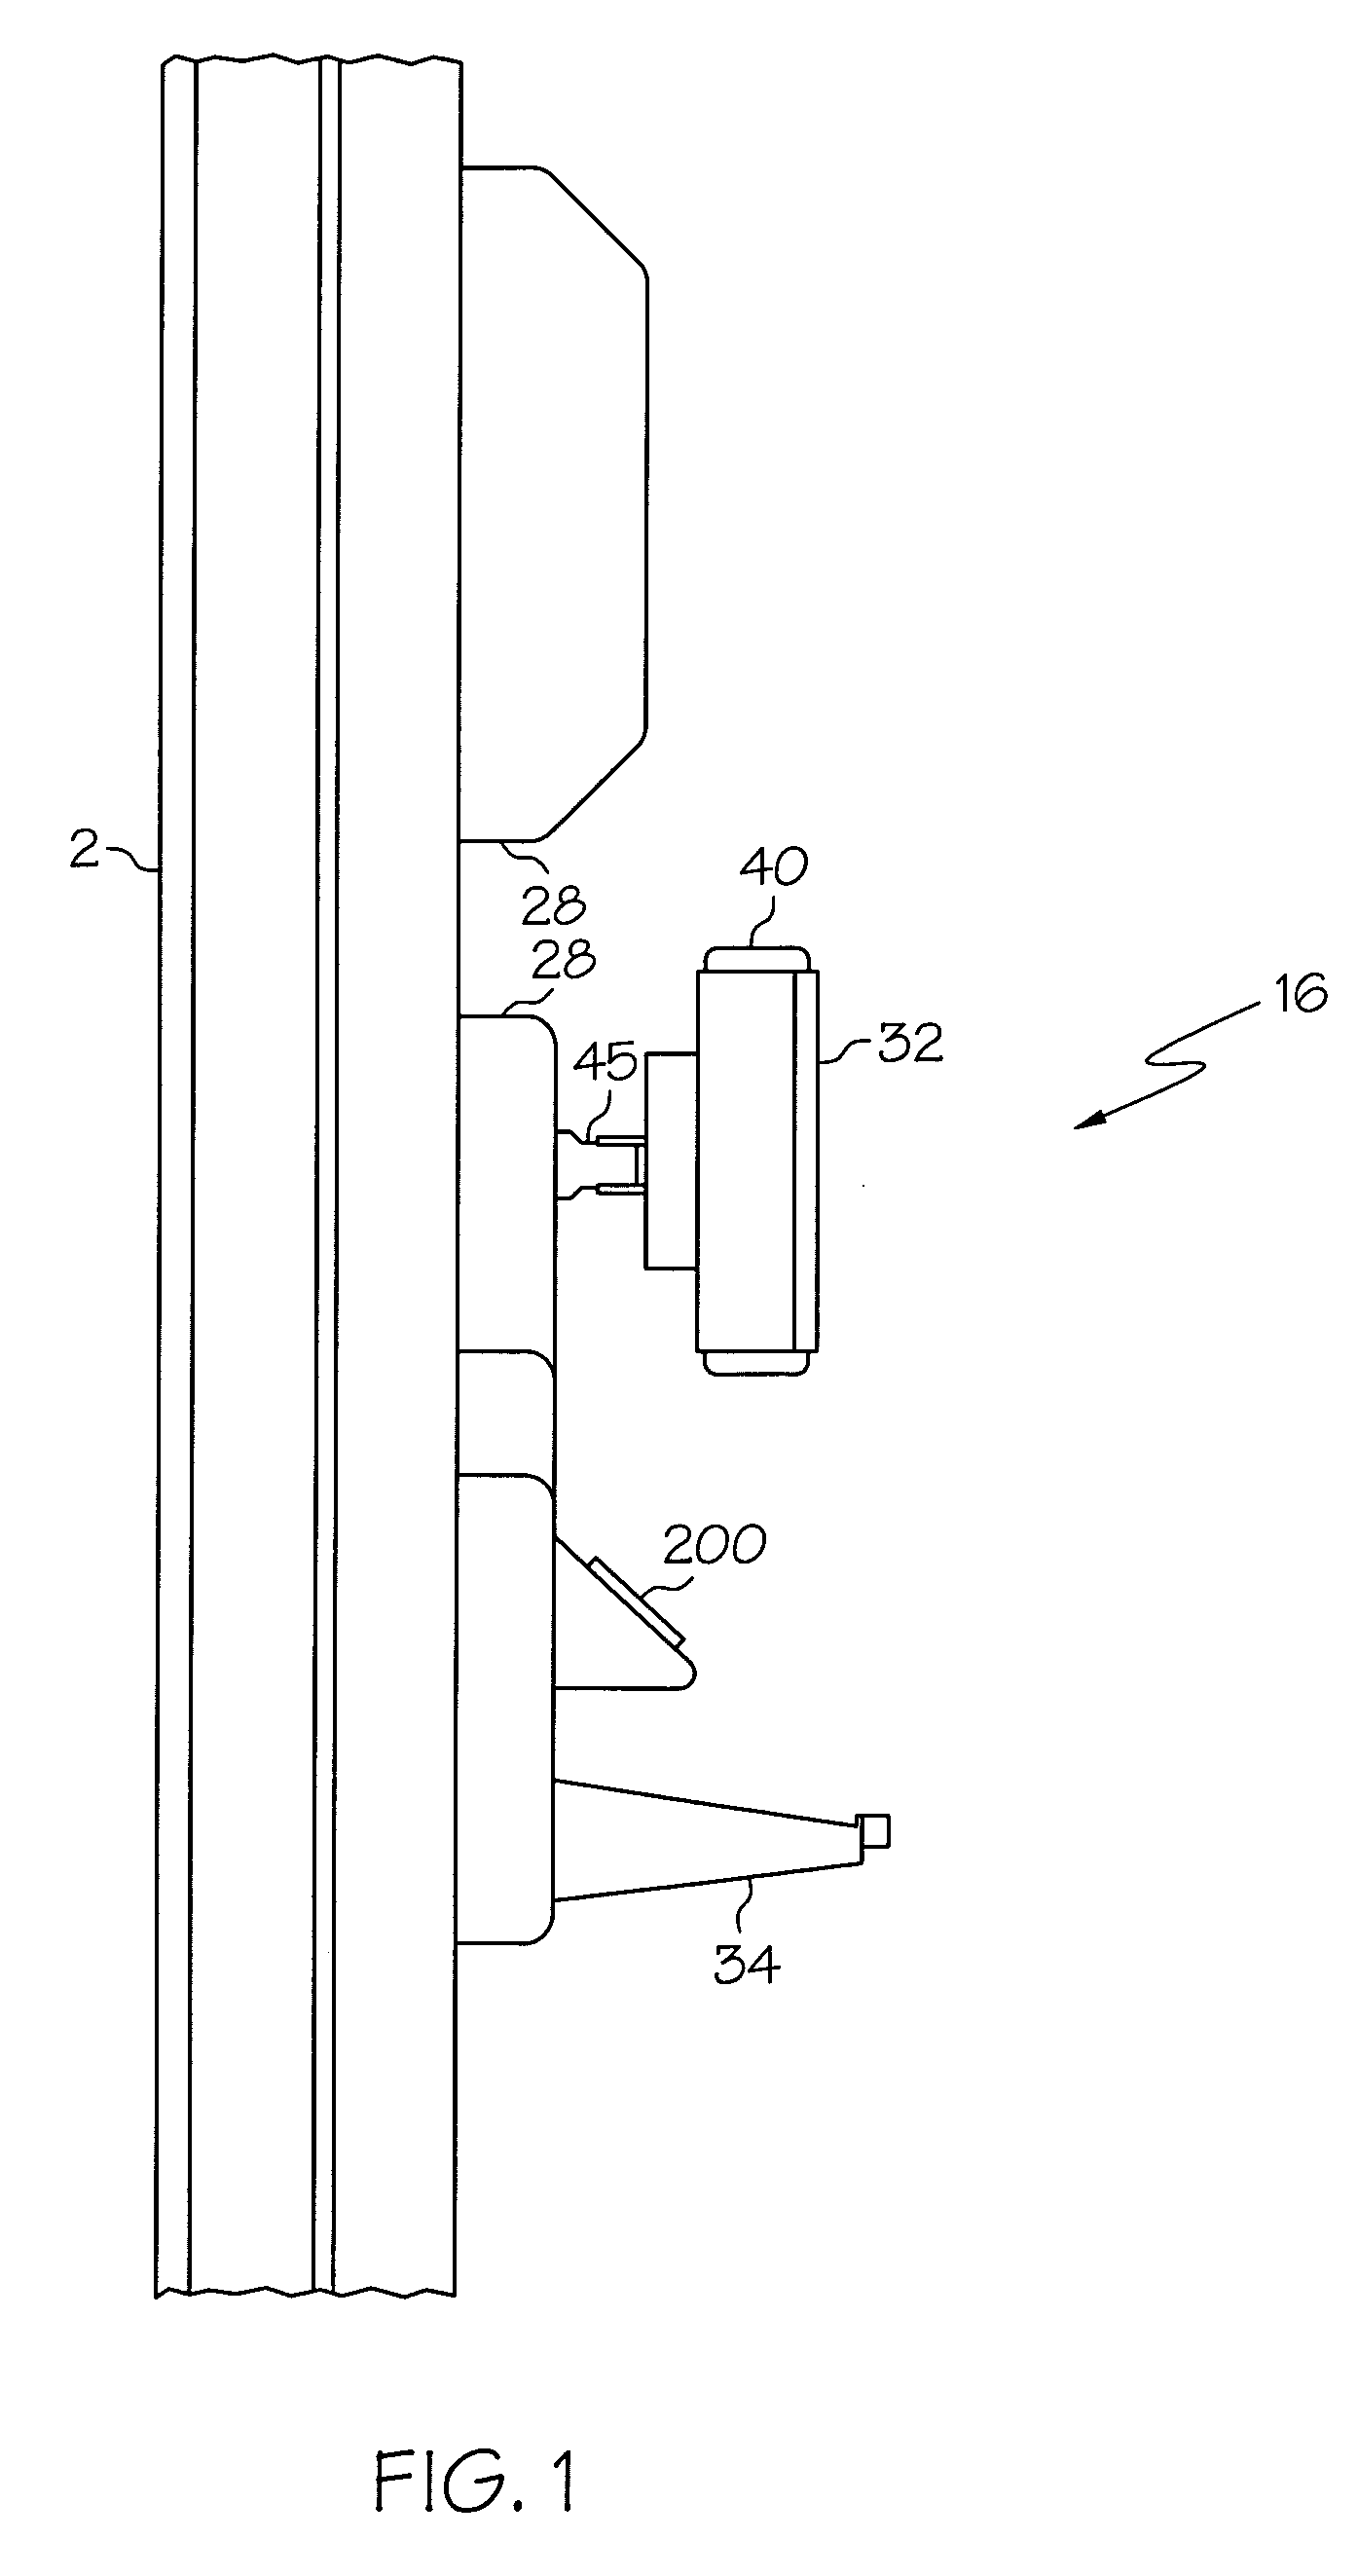 Electronically controlled vehicle lift and vehicle service system